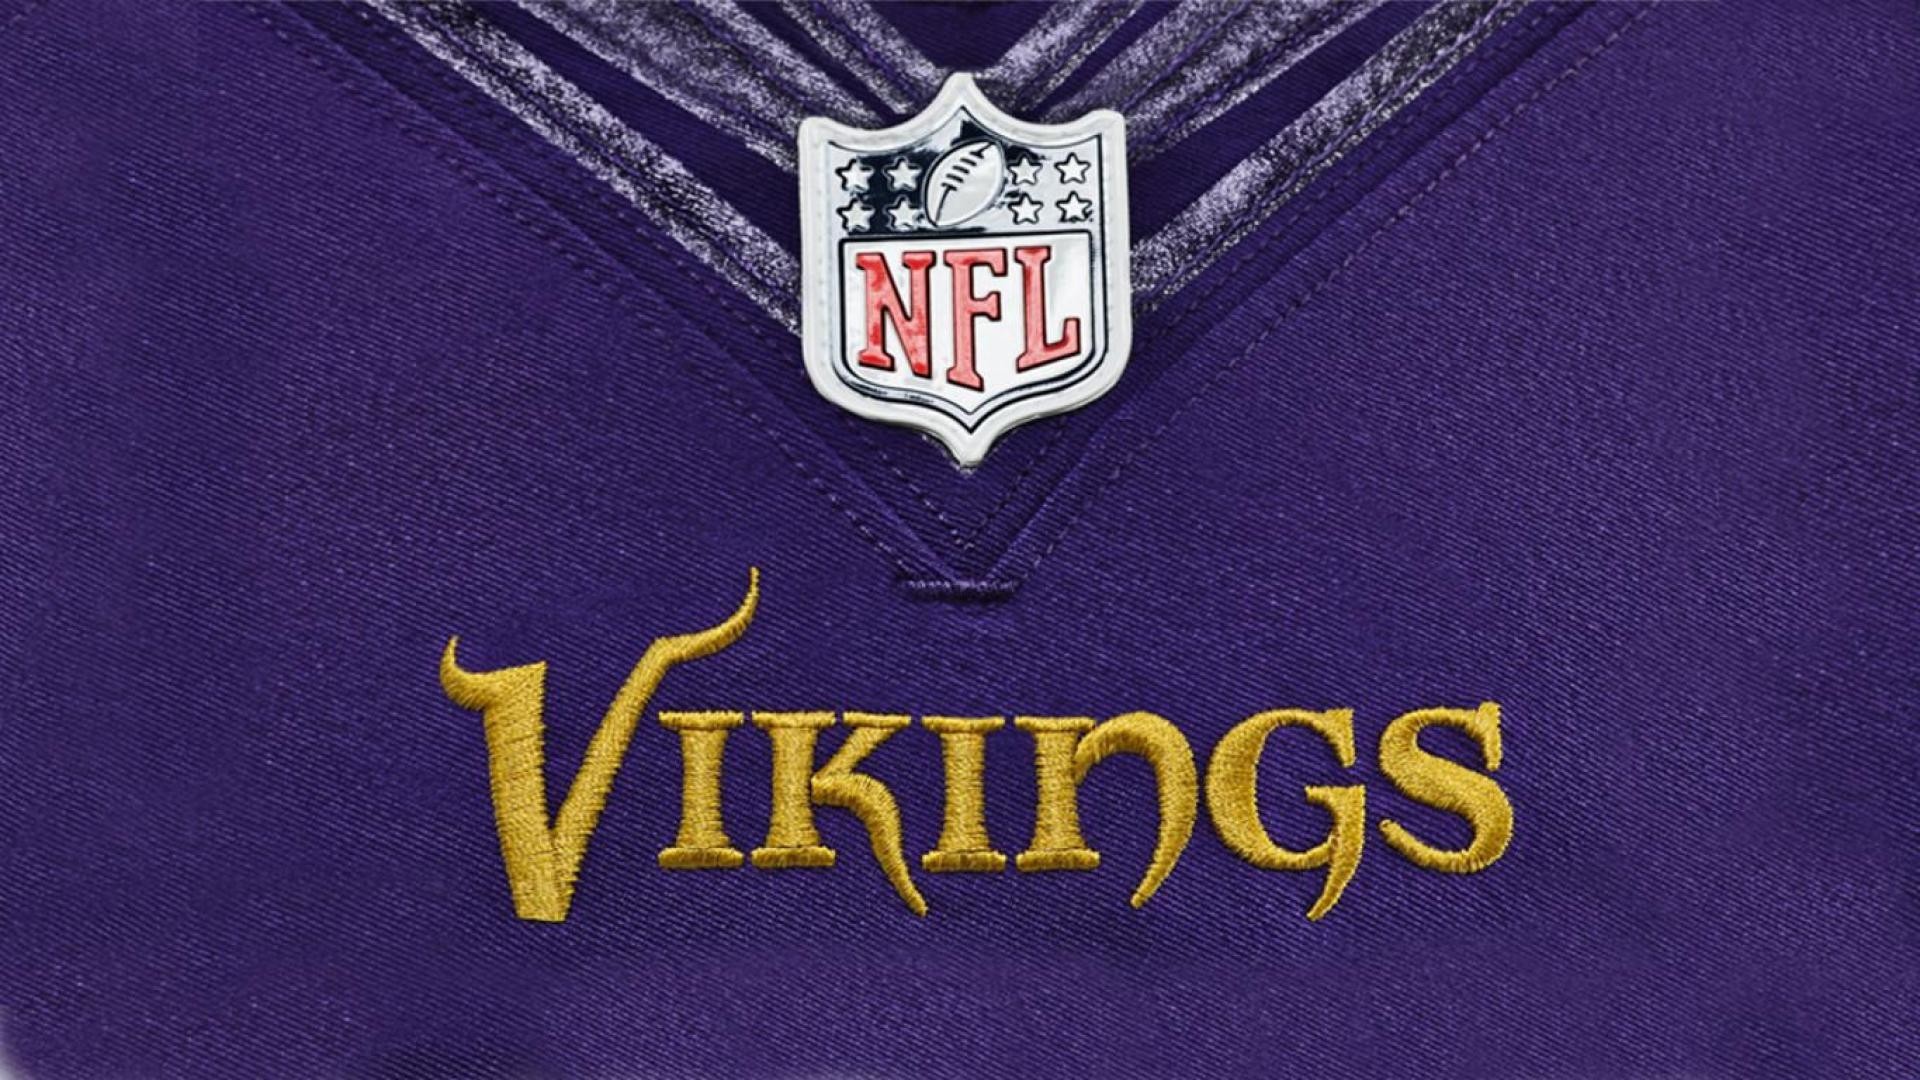 Minnesota Vikings Mac Backgrounds With Resolution 1920X1080 pixel. You can make this wallpaper for your Mac or Windows Desktop Background, iPhone, Android or Tablet and another Smartphone device for free